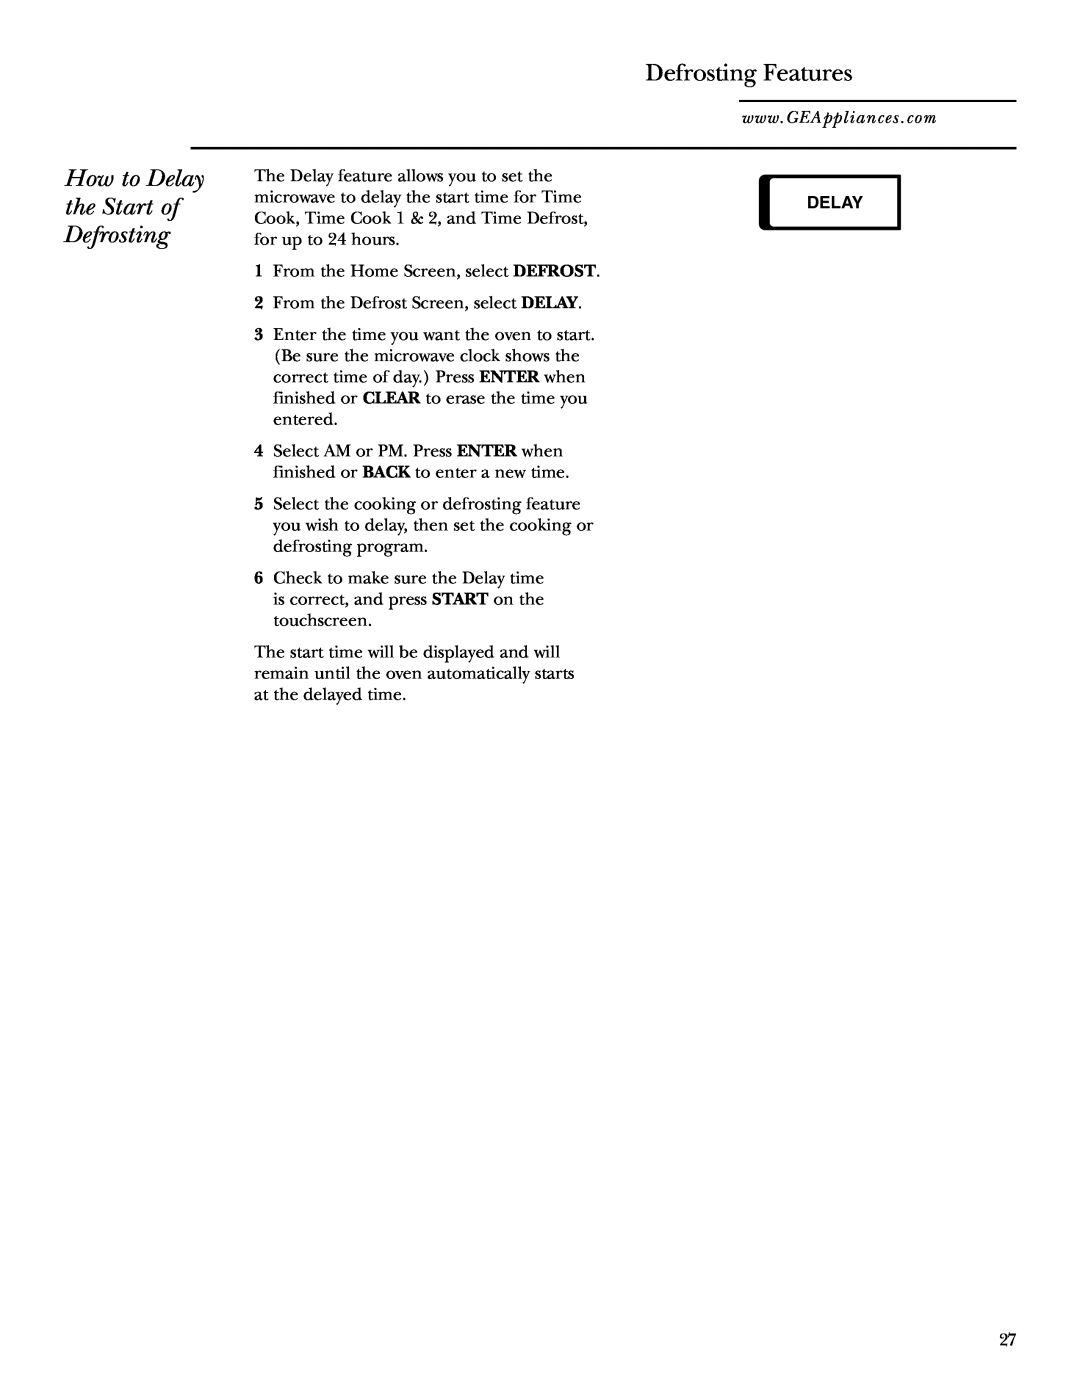 GE Monogram JVM2070 owner manual How to Delay the Start of Defrosting, Defrosting Features 